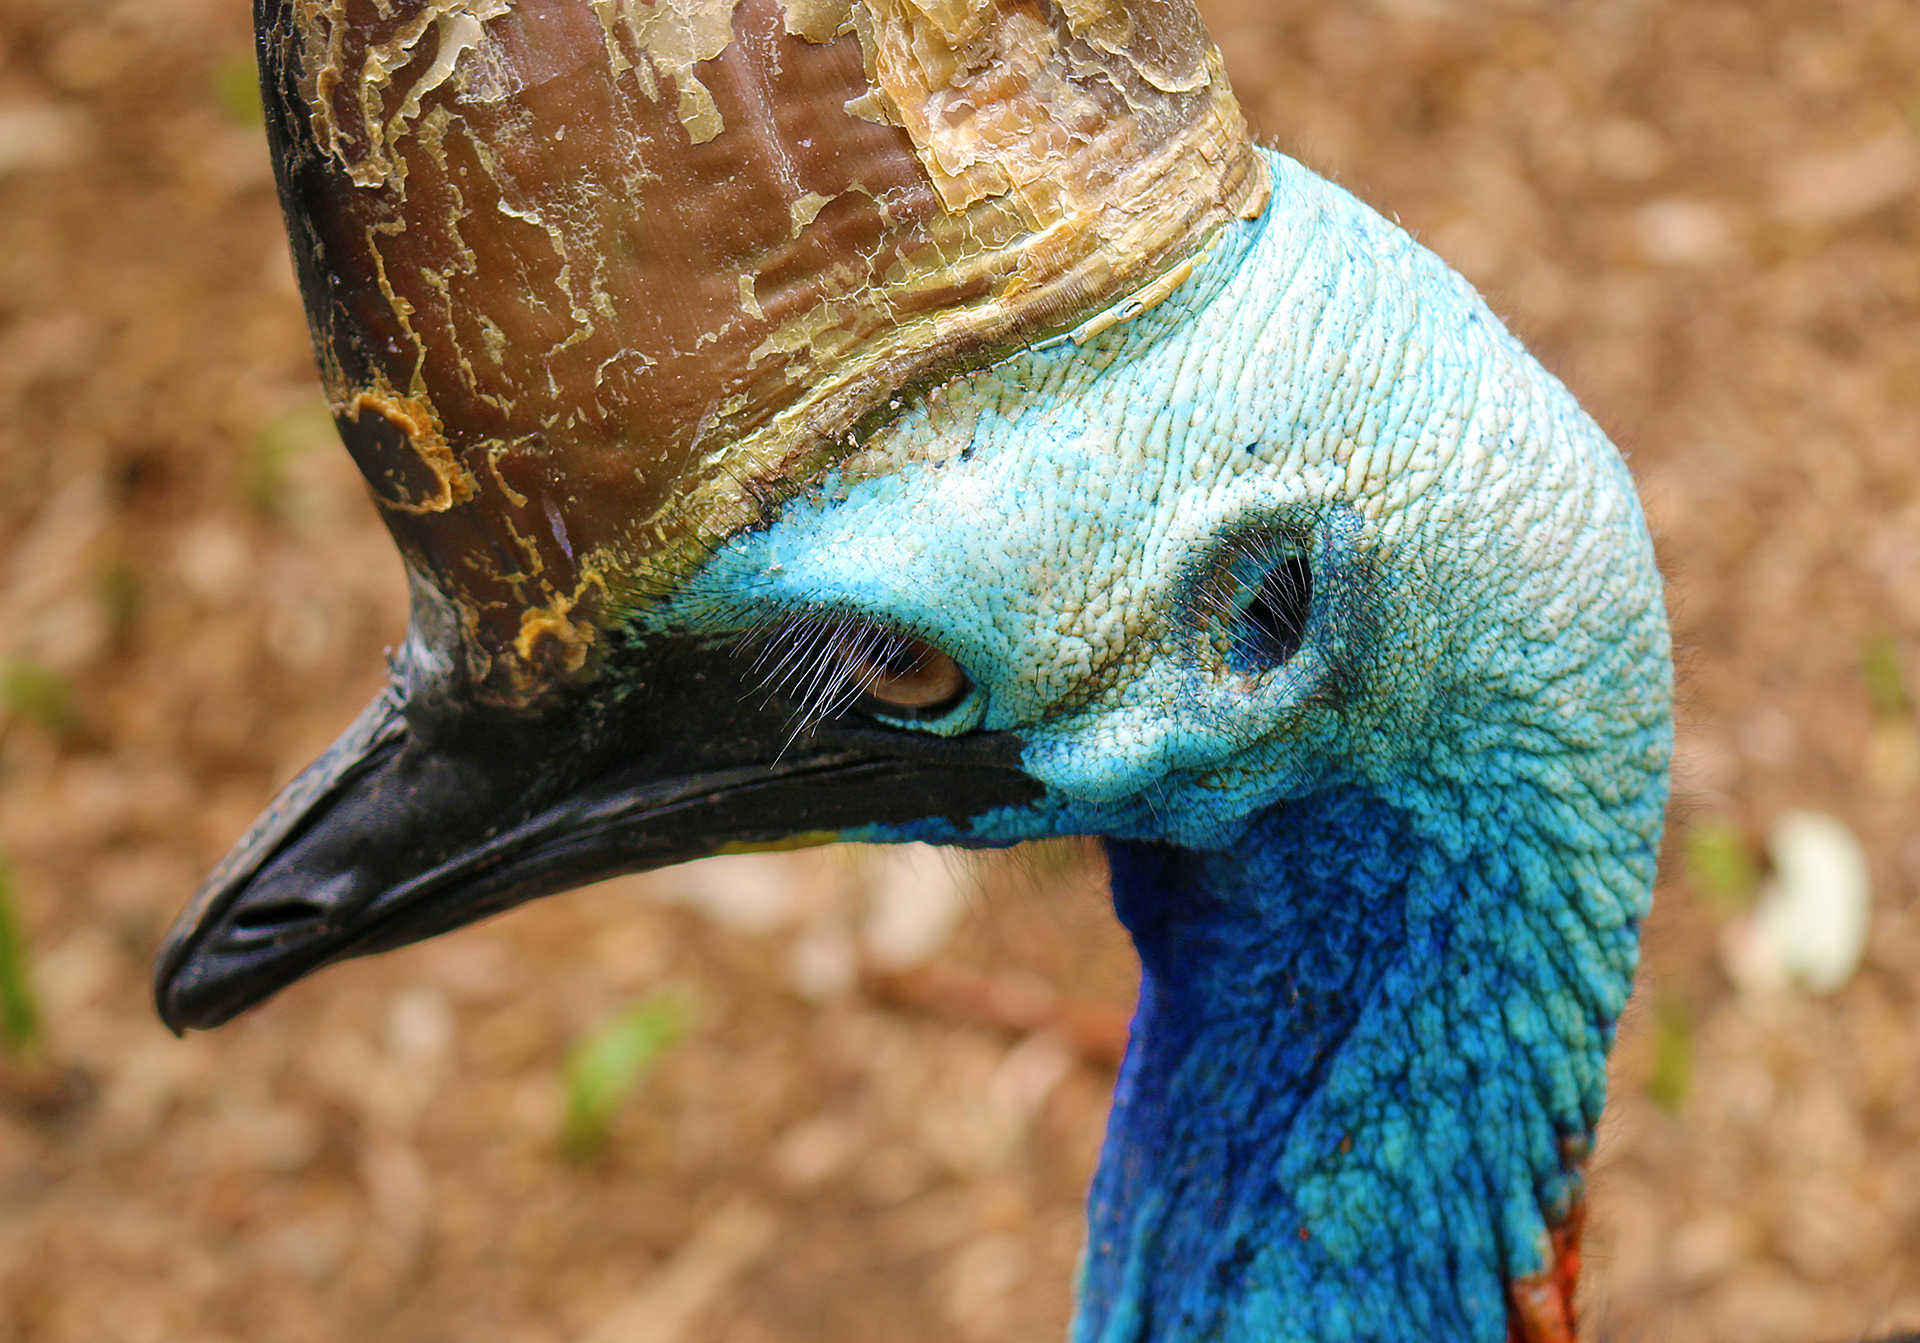 Rare Southern Cassowary Captured in Stunning Sunday Morning Photograph